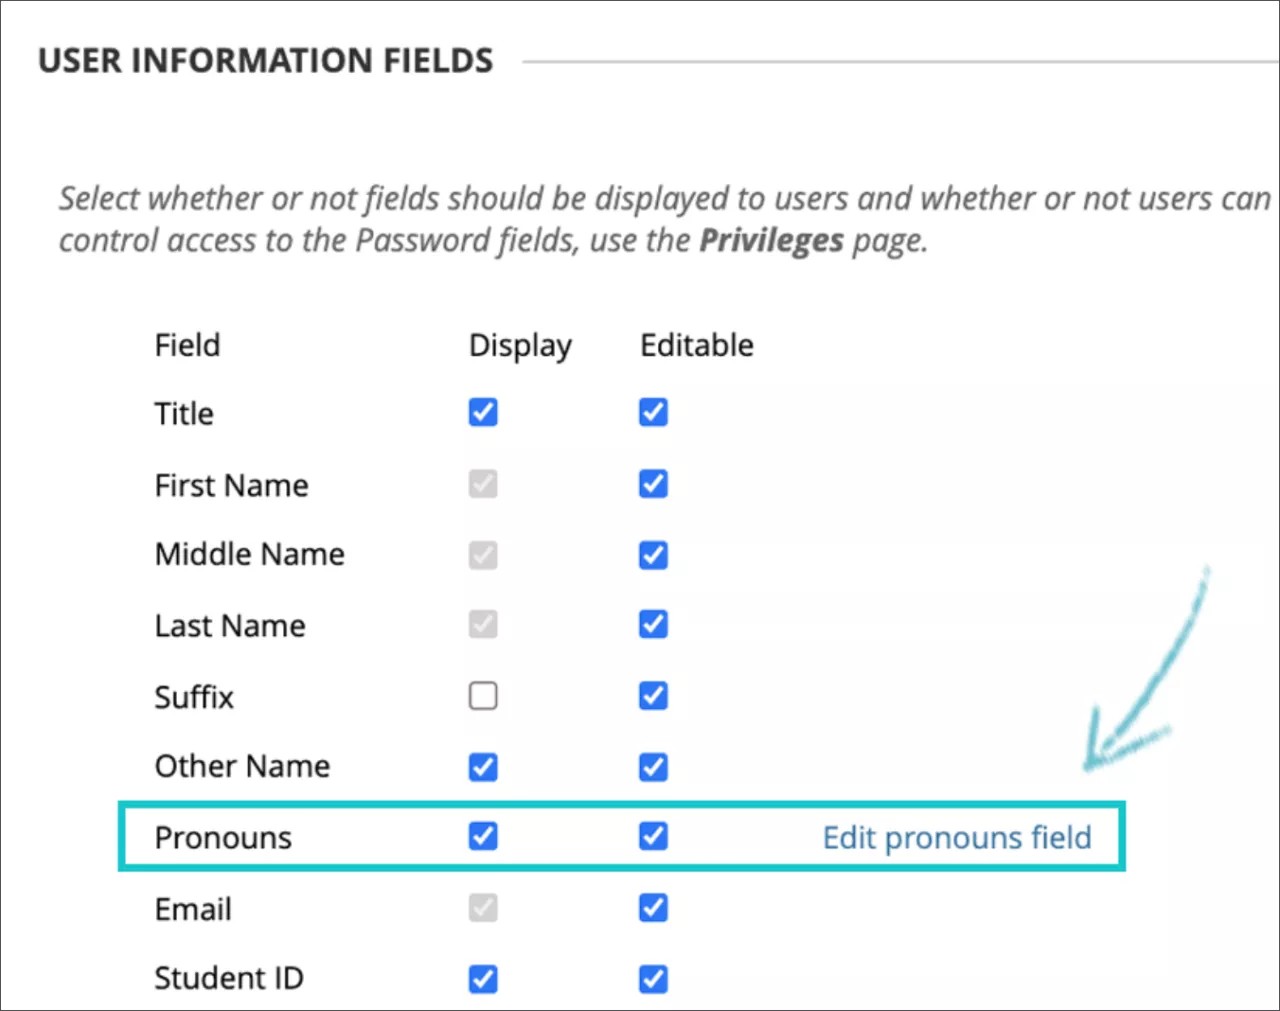 Administration Panel's User Information Fields showing Pronouns